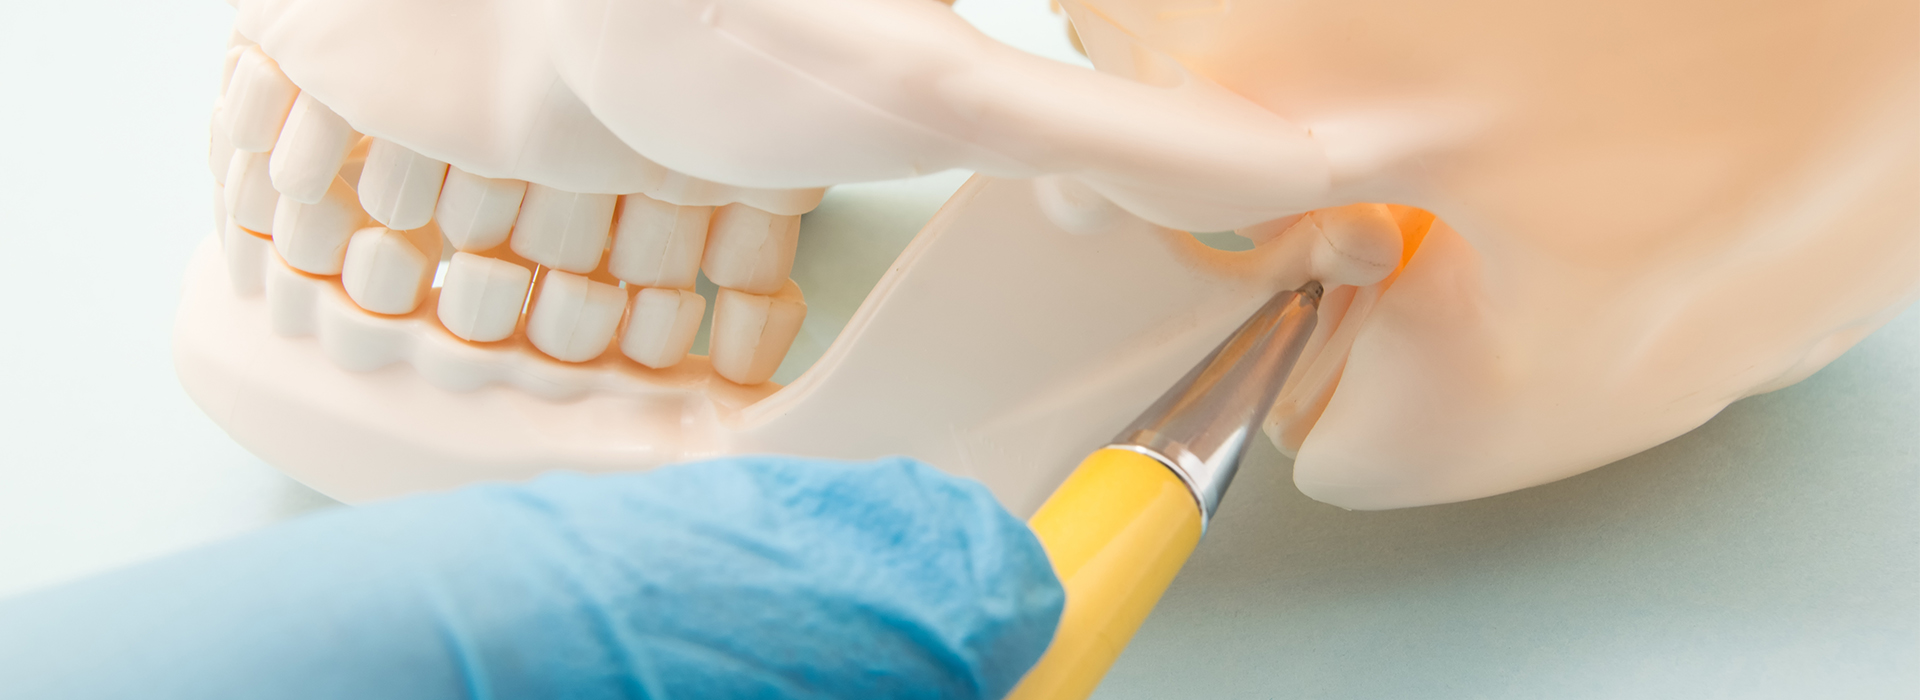 Hanhan Dental | Cosmetic Dentistry, TMJ Disorders and Snoring Appliances